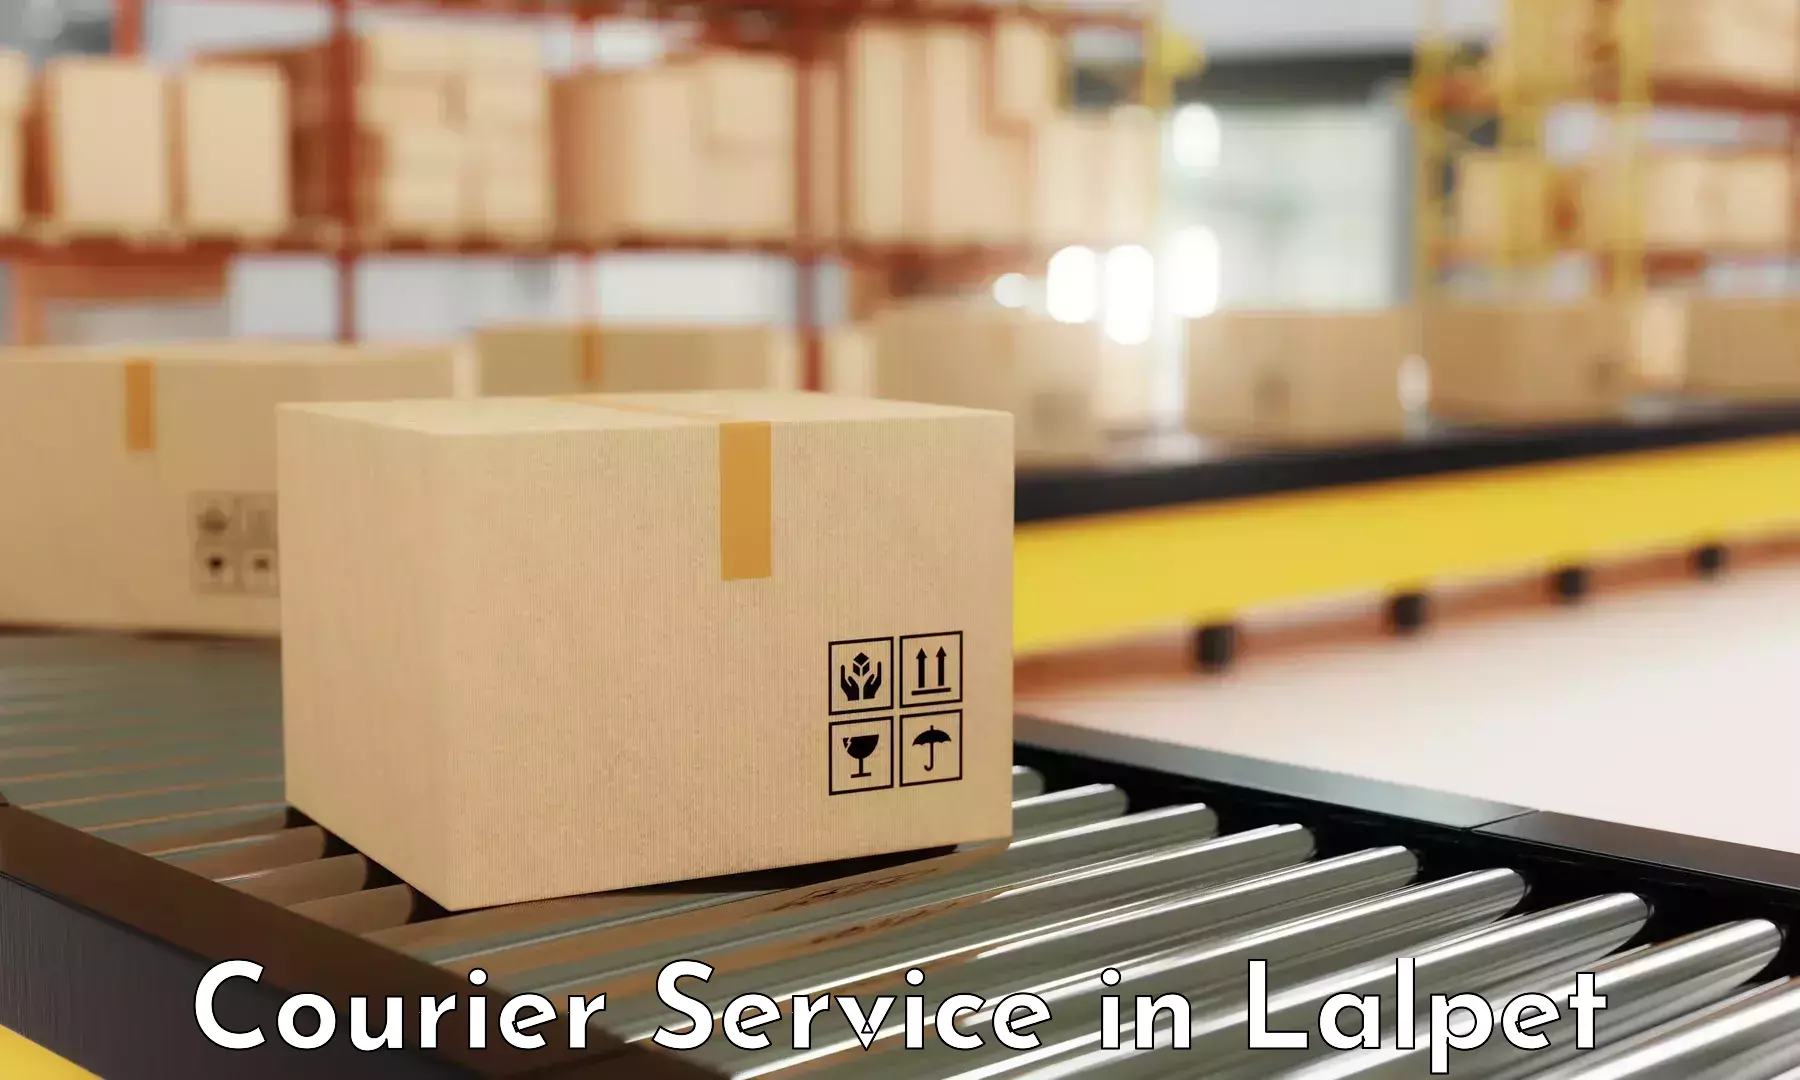 Customer-oriented courier services in Lalpet